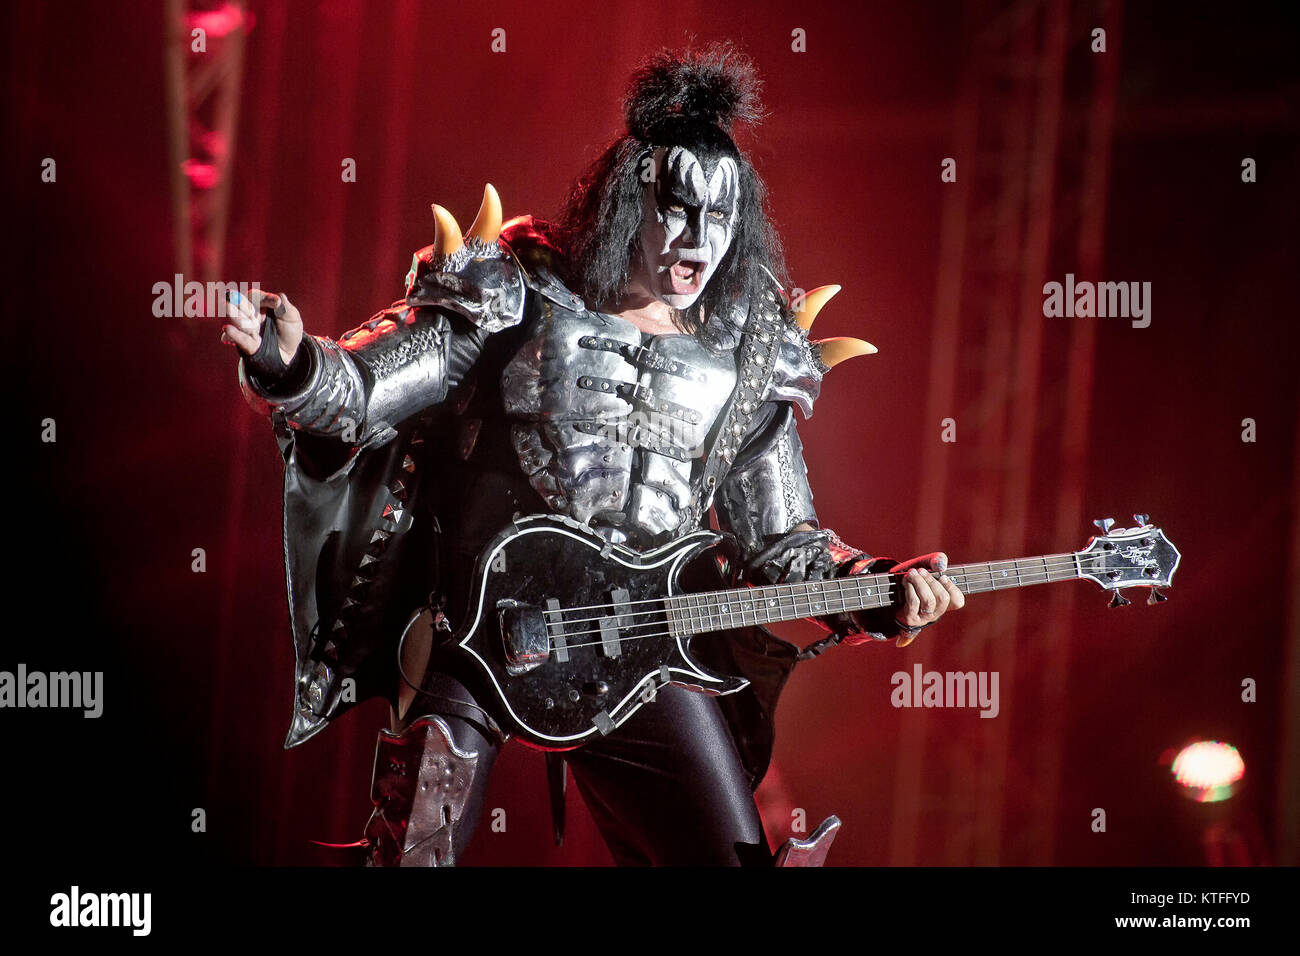 The American rock band Kiss performs a live concert at the Swedish music festival Sweden Rock Festival 2013. Here vocalist and singer Gene Simmons is seen live on stage. Sweden, 06/06 2013. Stock Photo